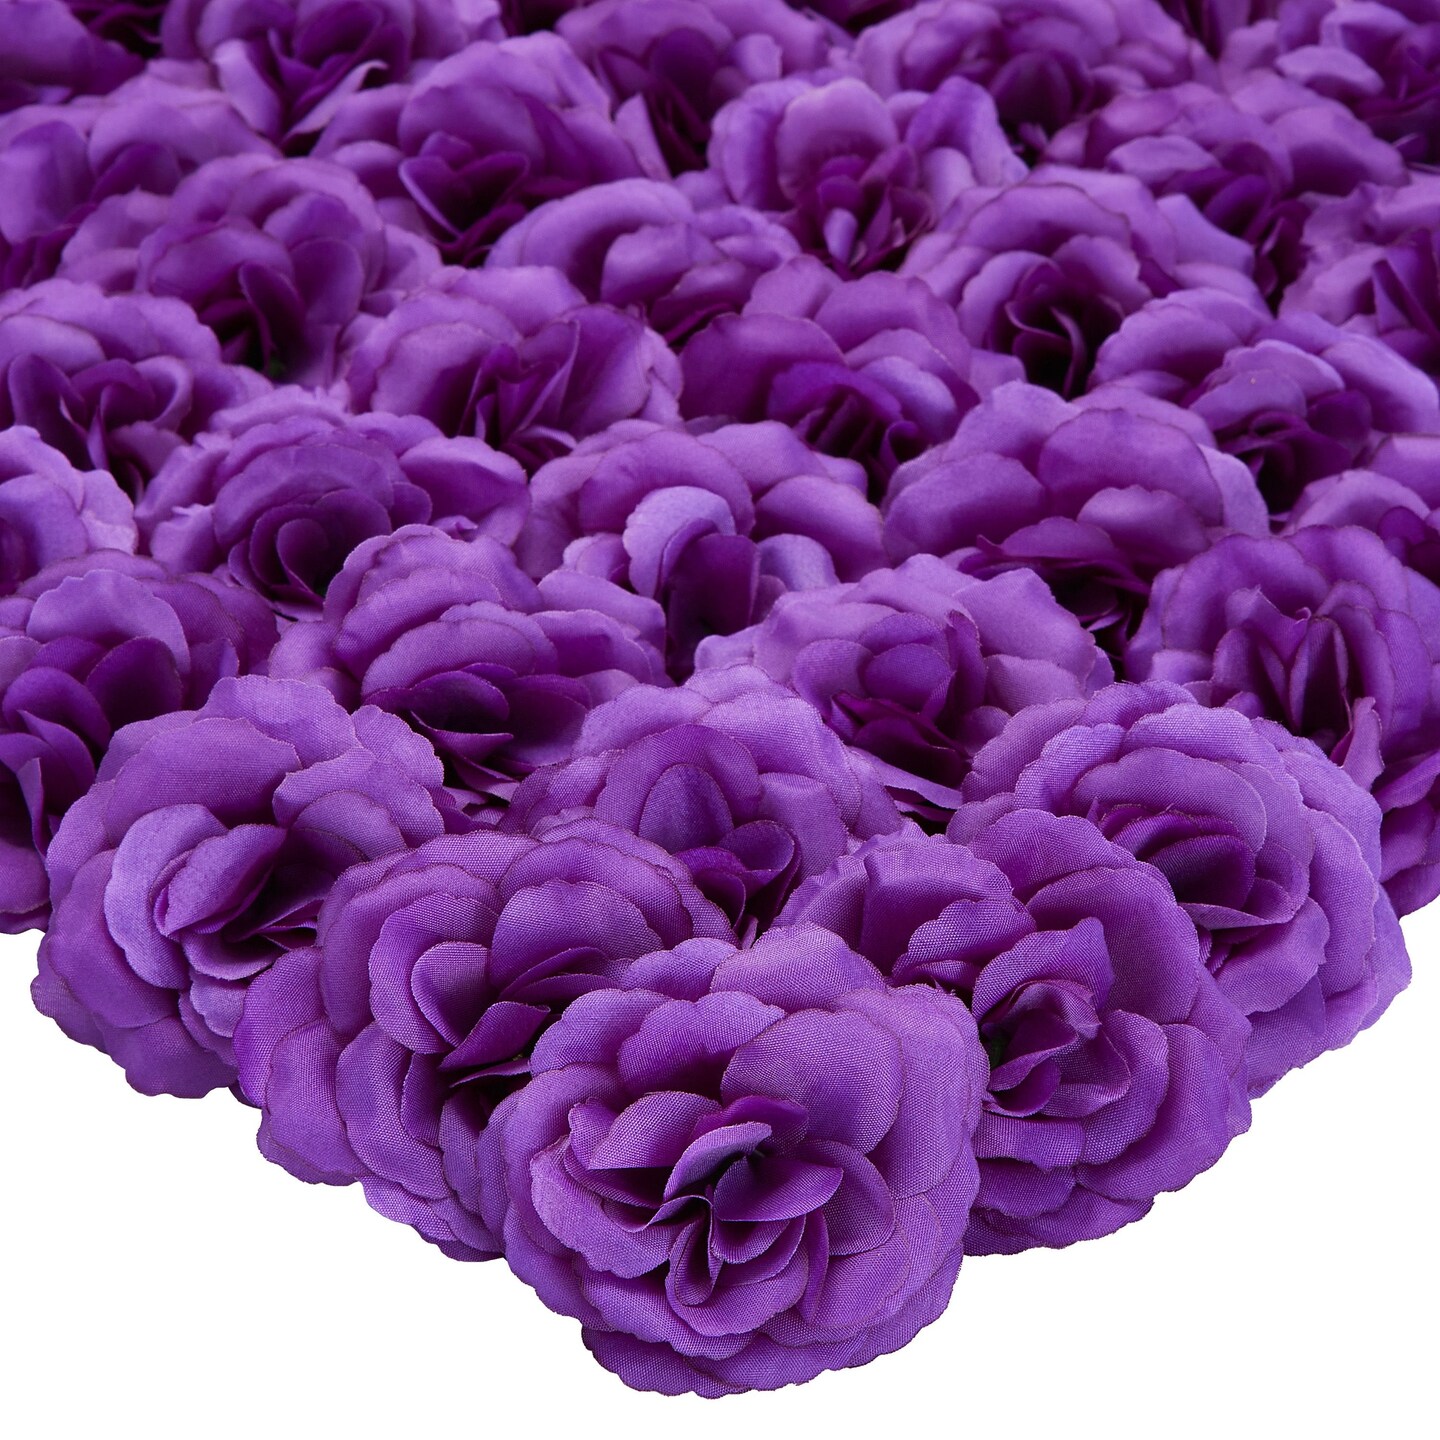 50 Pack Purple Roses Artificial Flowers Bulk, 3 Inch Stemless Fake Silk Roses for Decorations, Wedding, Faux Bouquets